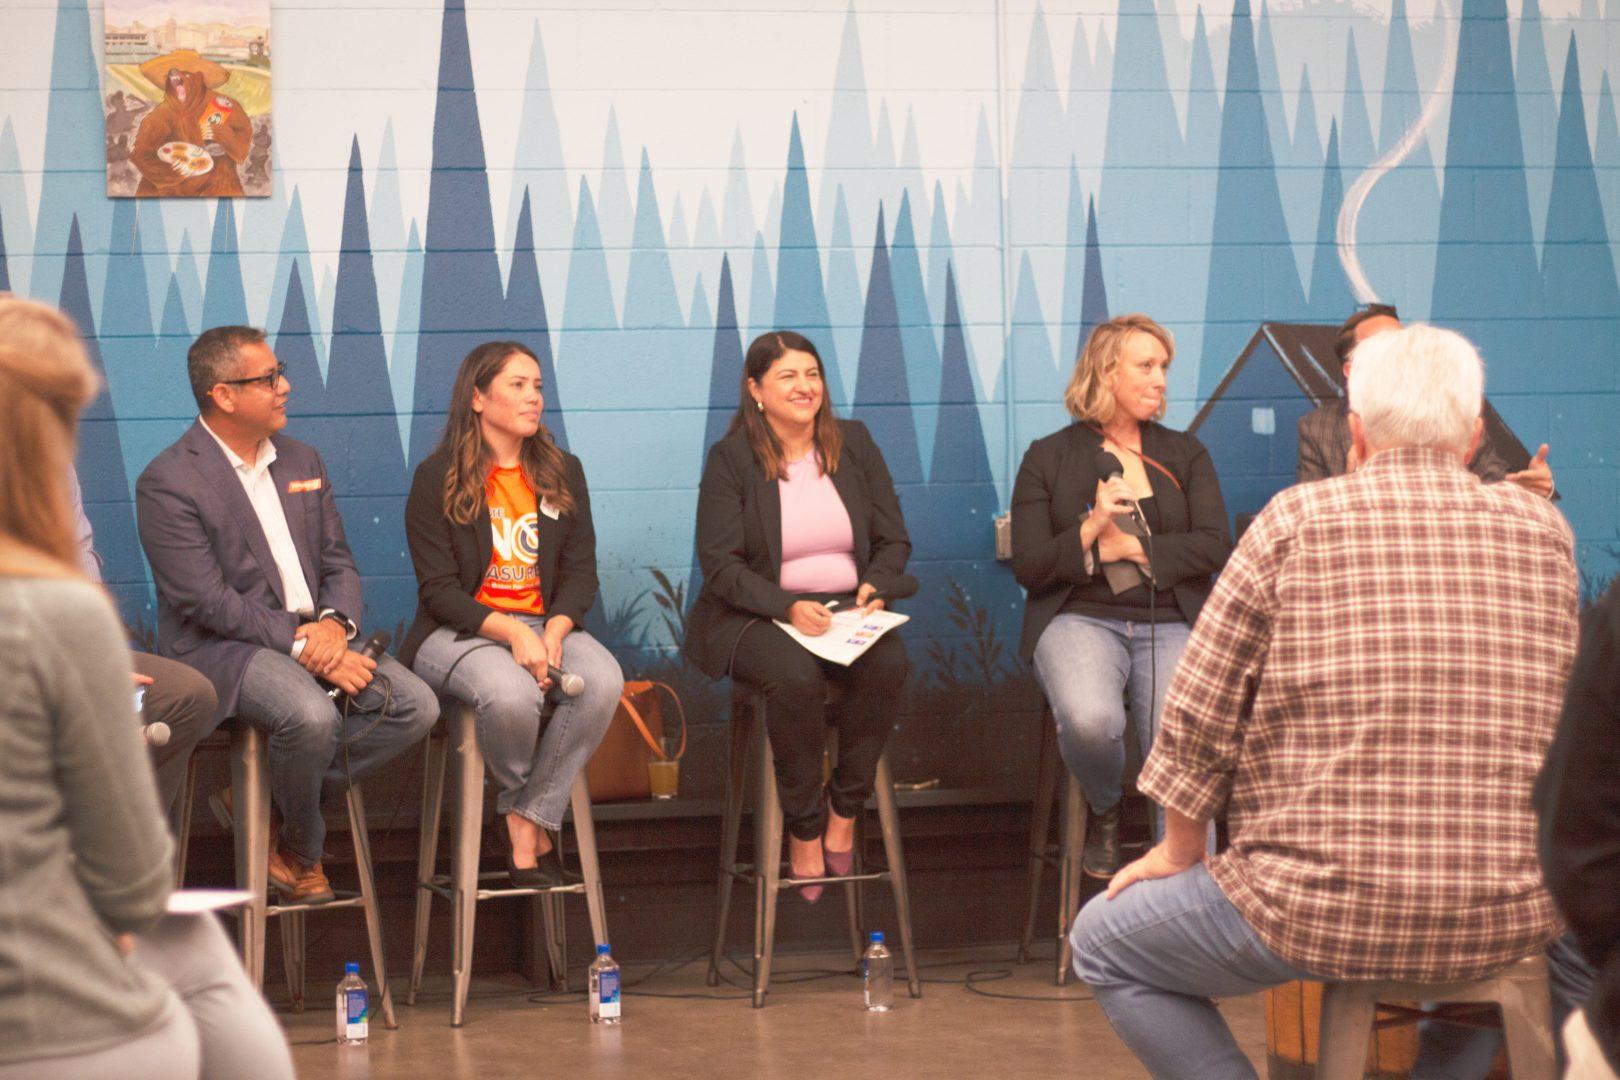 Fresnoland hosted “Ballots and Brews” where local community members, from city council members to local activist, debat-
ed different measures on the 2022 election ballot at Tioga-Sequoia brews on Oct. 18. (Jannah Geraldo/The Collegian)